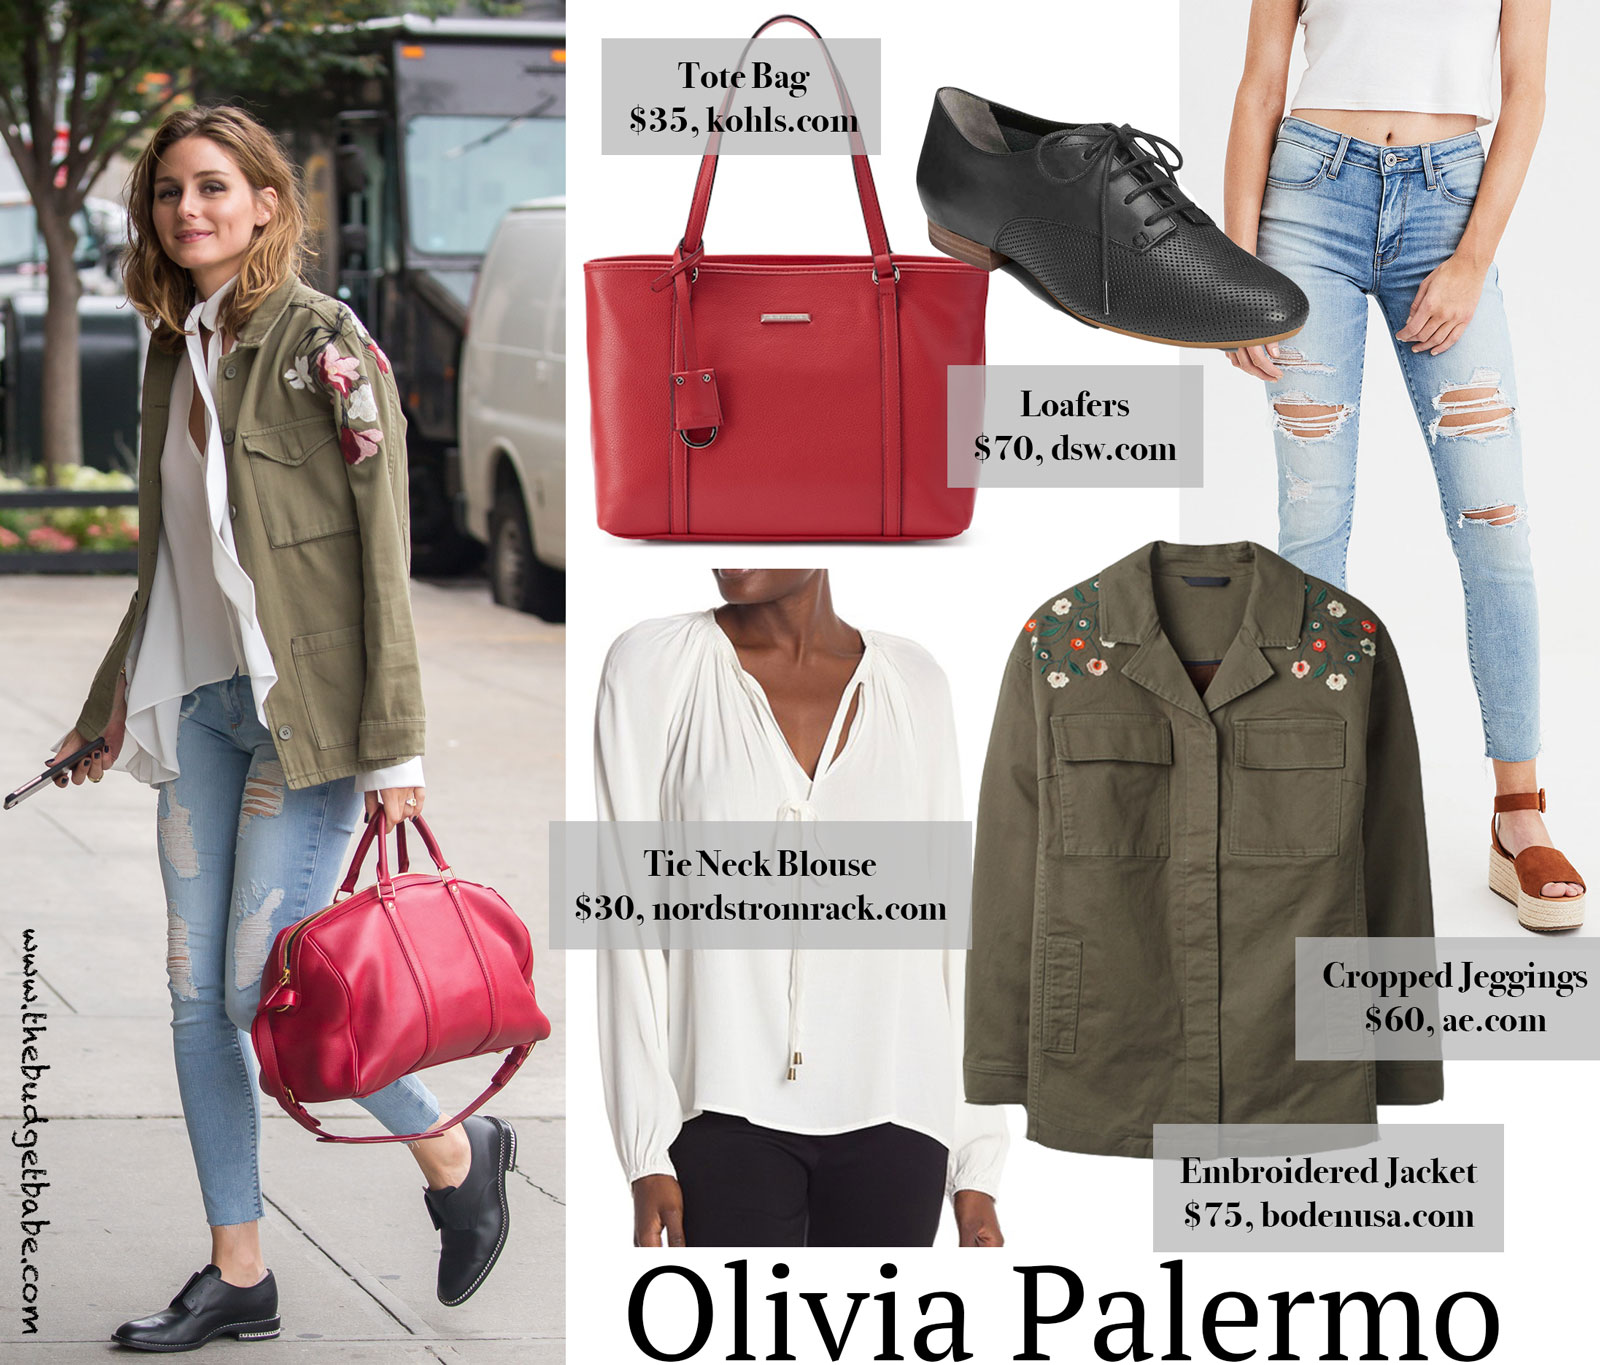 Olivia Palermo Embroidered Jacket Look for Less